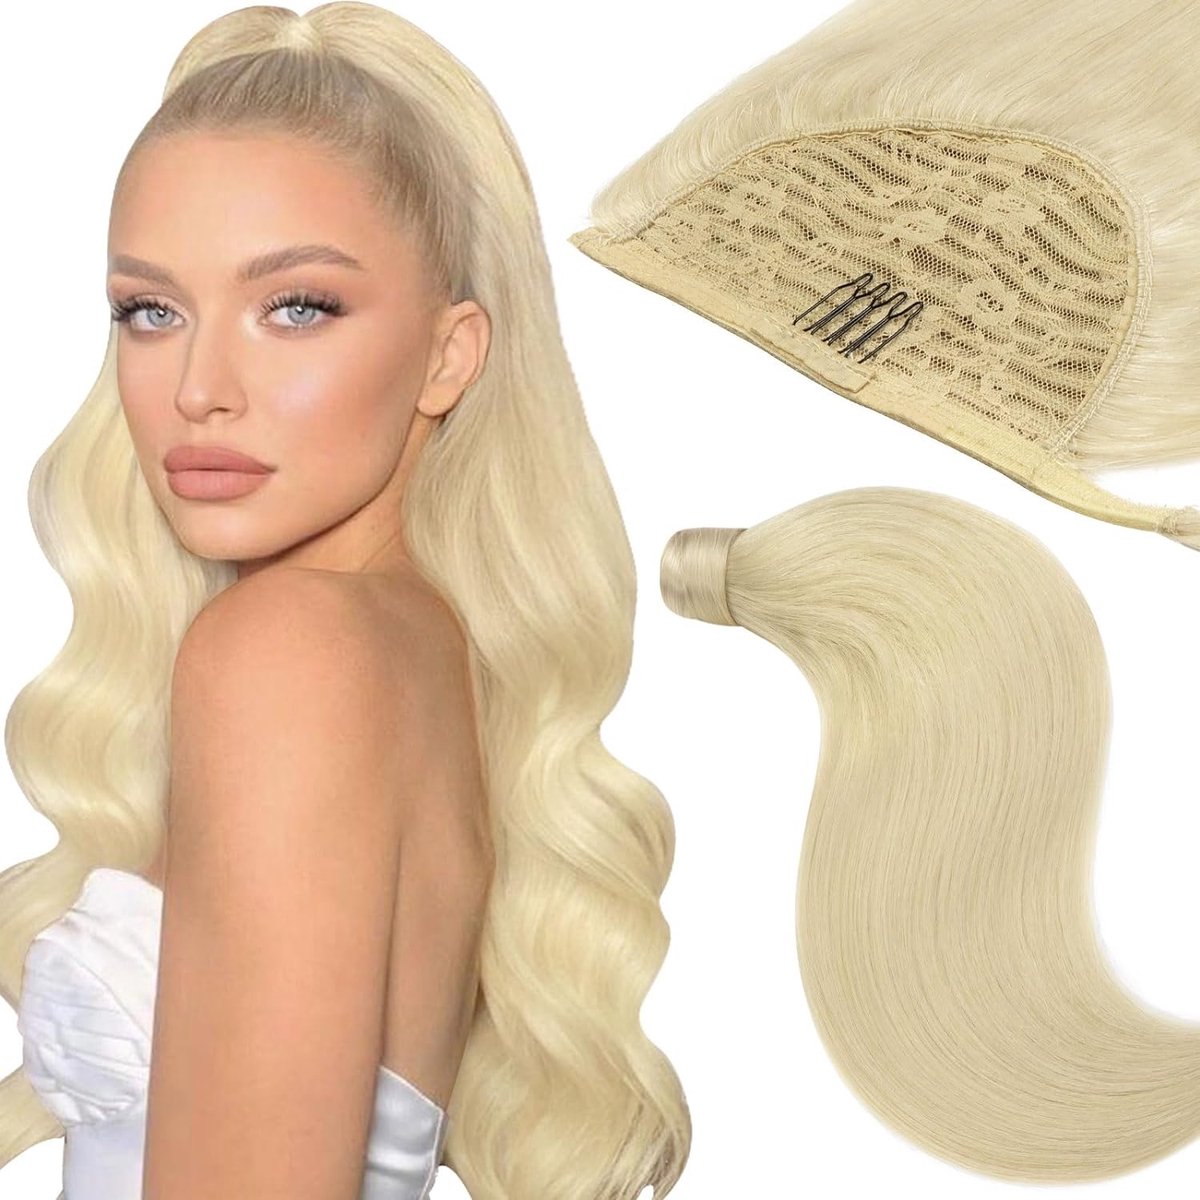 Vivendi Ponytail Clip In Hairextensions| Human Hair Echt Haar |Wrap Around Hairextensions | 18